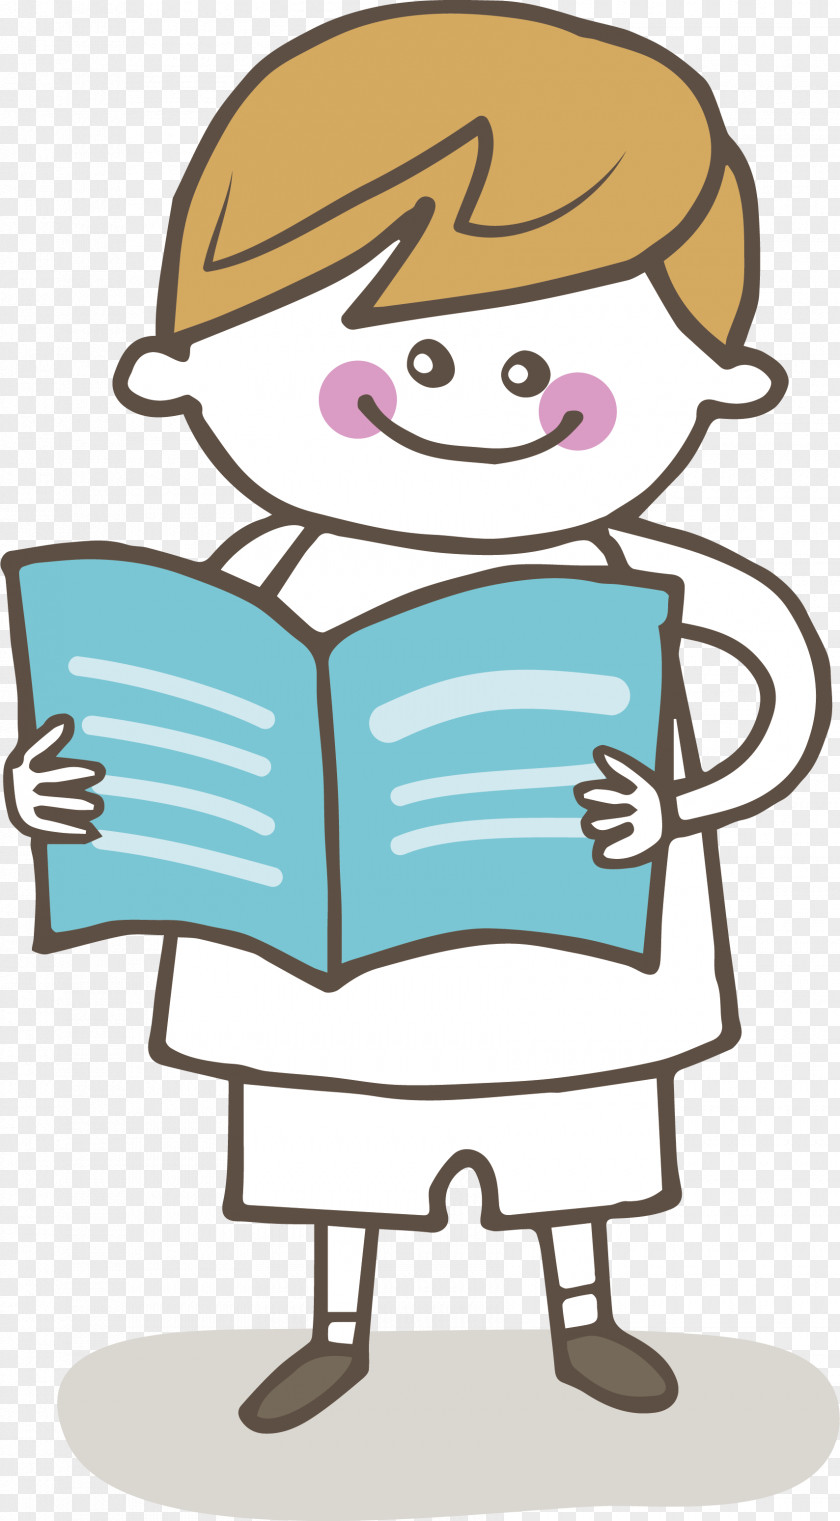 A Child With Book In Hand Clip Art PNG